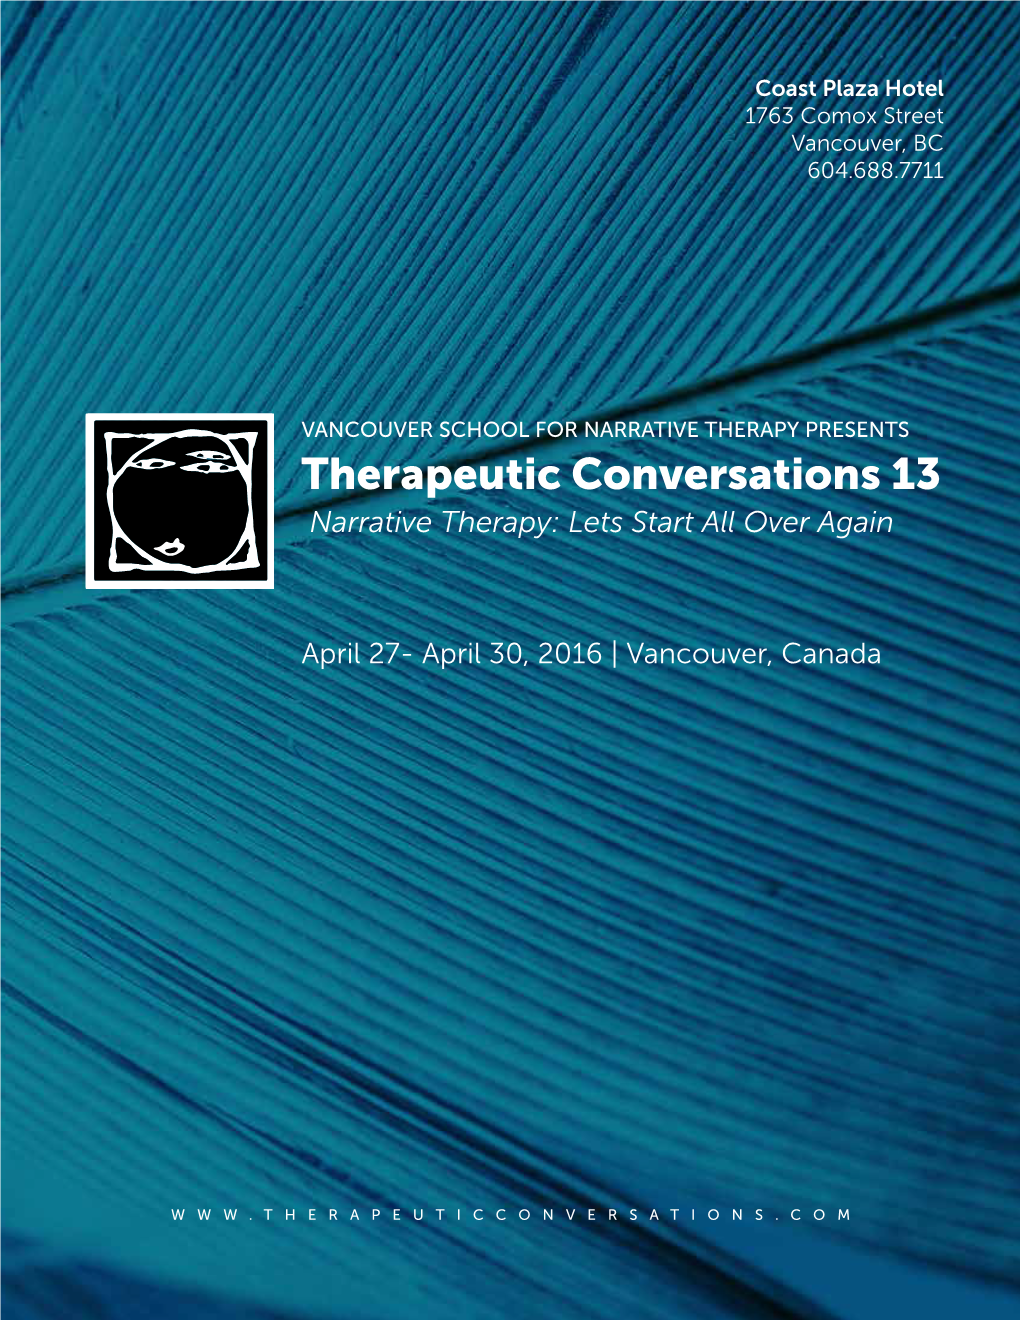 Therapeutic Conversations 13 Narrative Therapy: Lets Start All Over Again